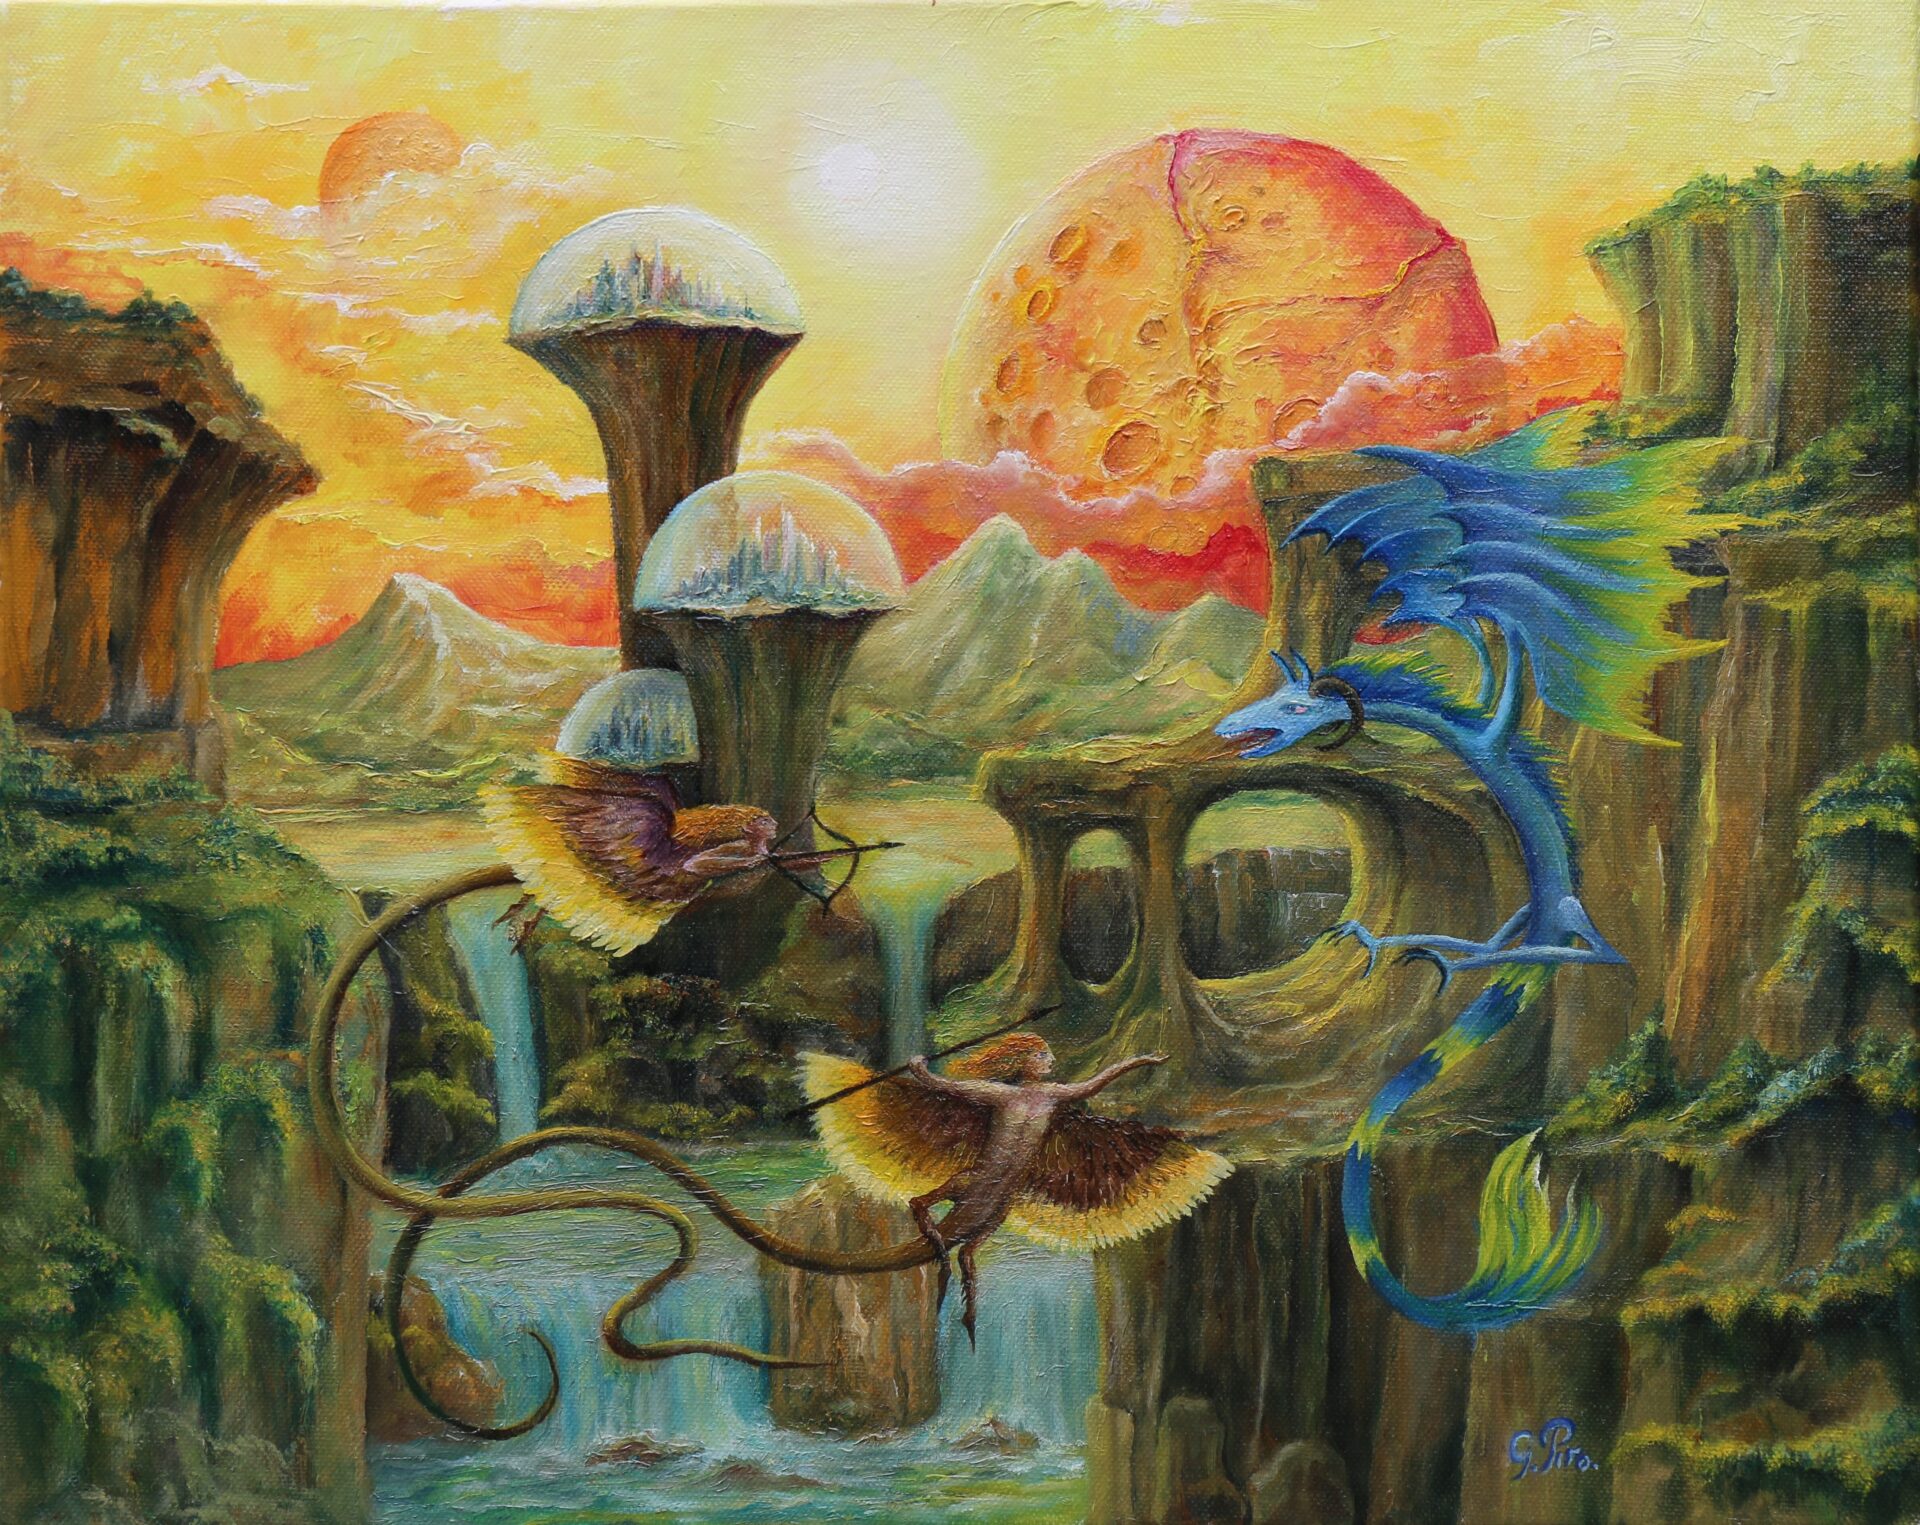 oil painting, gregory pyra piro, surreal, sunset, canyon, bio dome mesas, waterfalls, bluffs, mountains, demons, dragons, creatures, bio domes, buttes, distant mountains, sky, yellow, orange, moons, ethereal atmosphere, artist's signature